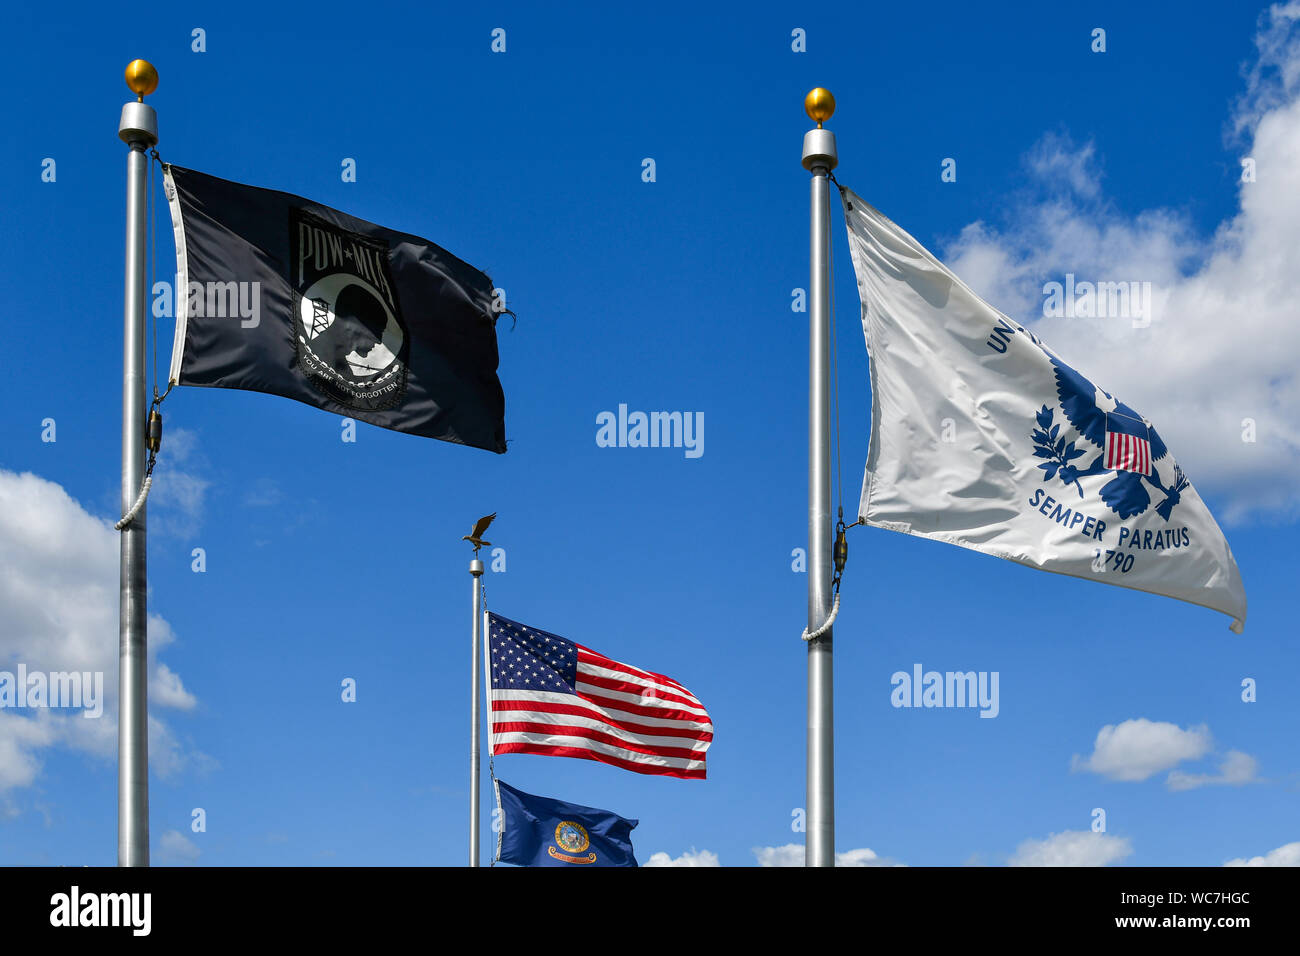 Armed service flags fly near the American flag including the Marine Semper Paratus logo. the MIA POW flag for Missing in Action and Prisoners of War Stock Photo